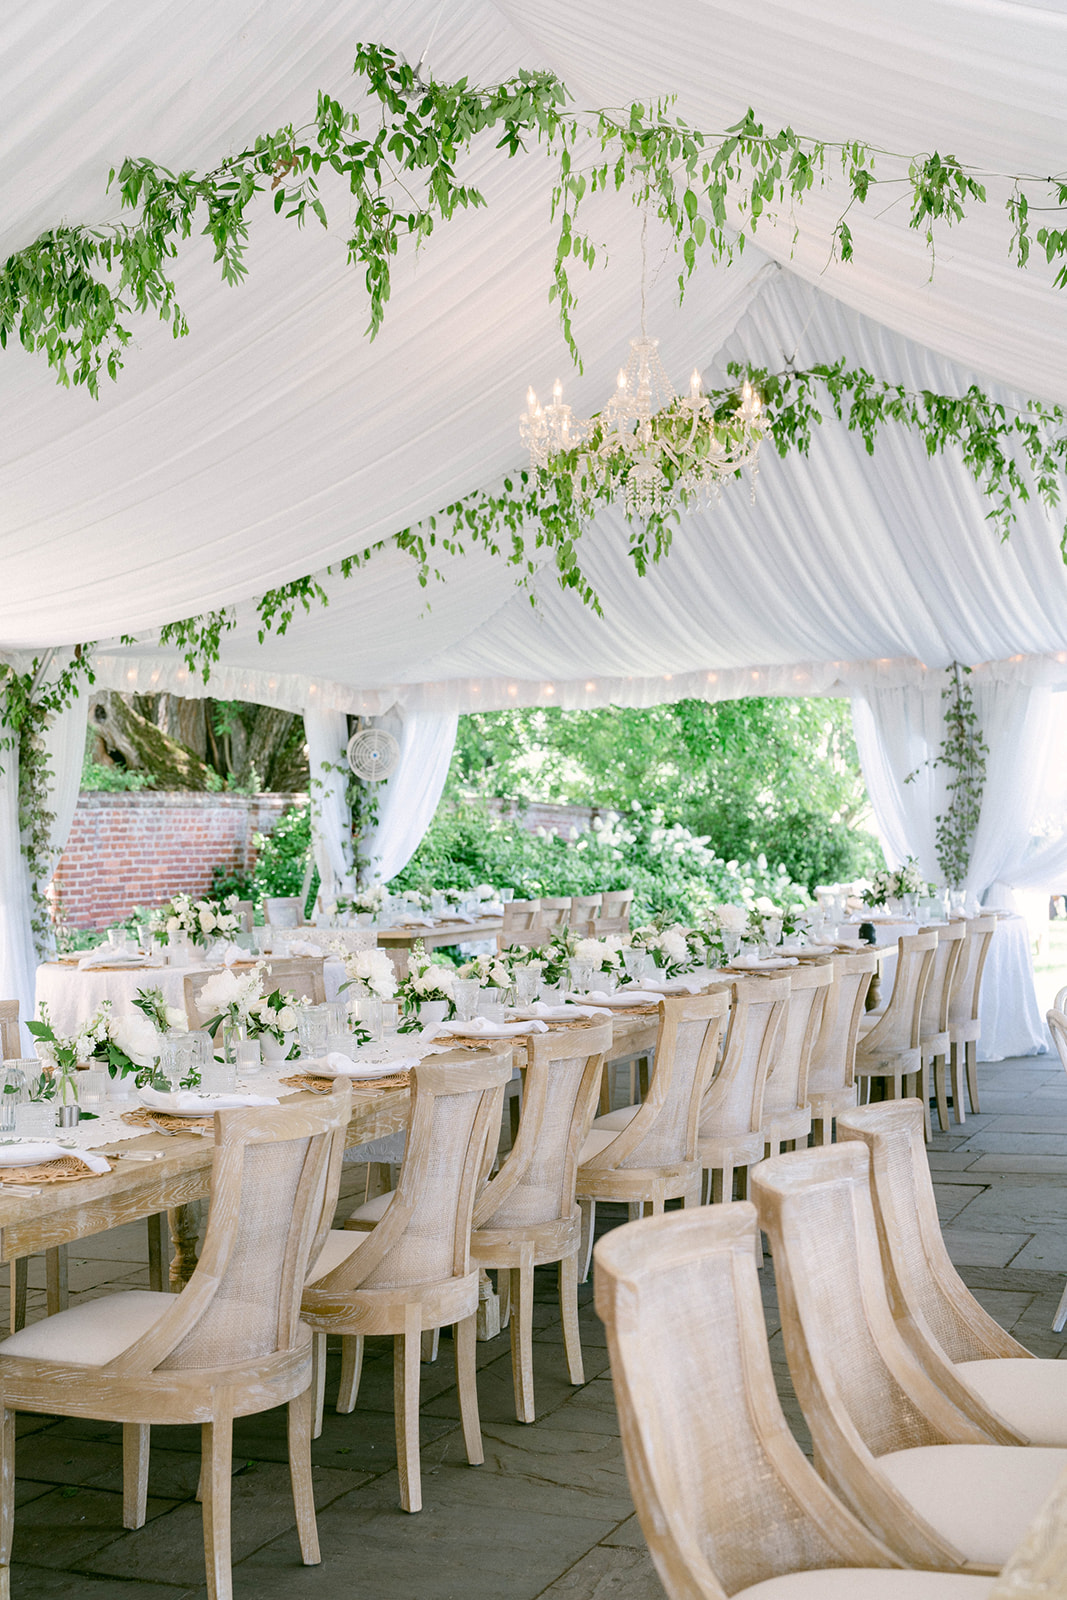 elegant wedding setup under tent with fancy chairs, florals, chandeliers, and ivy hung from tent